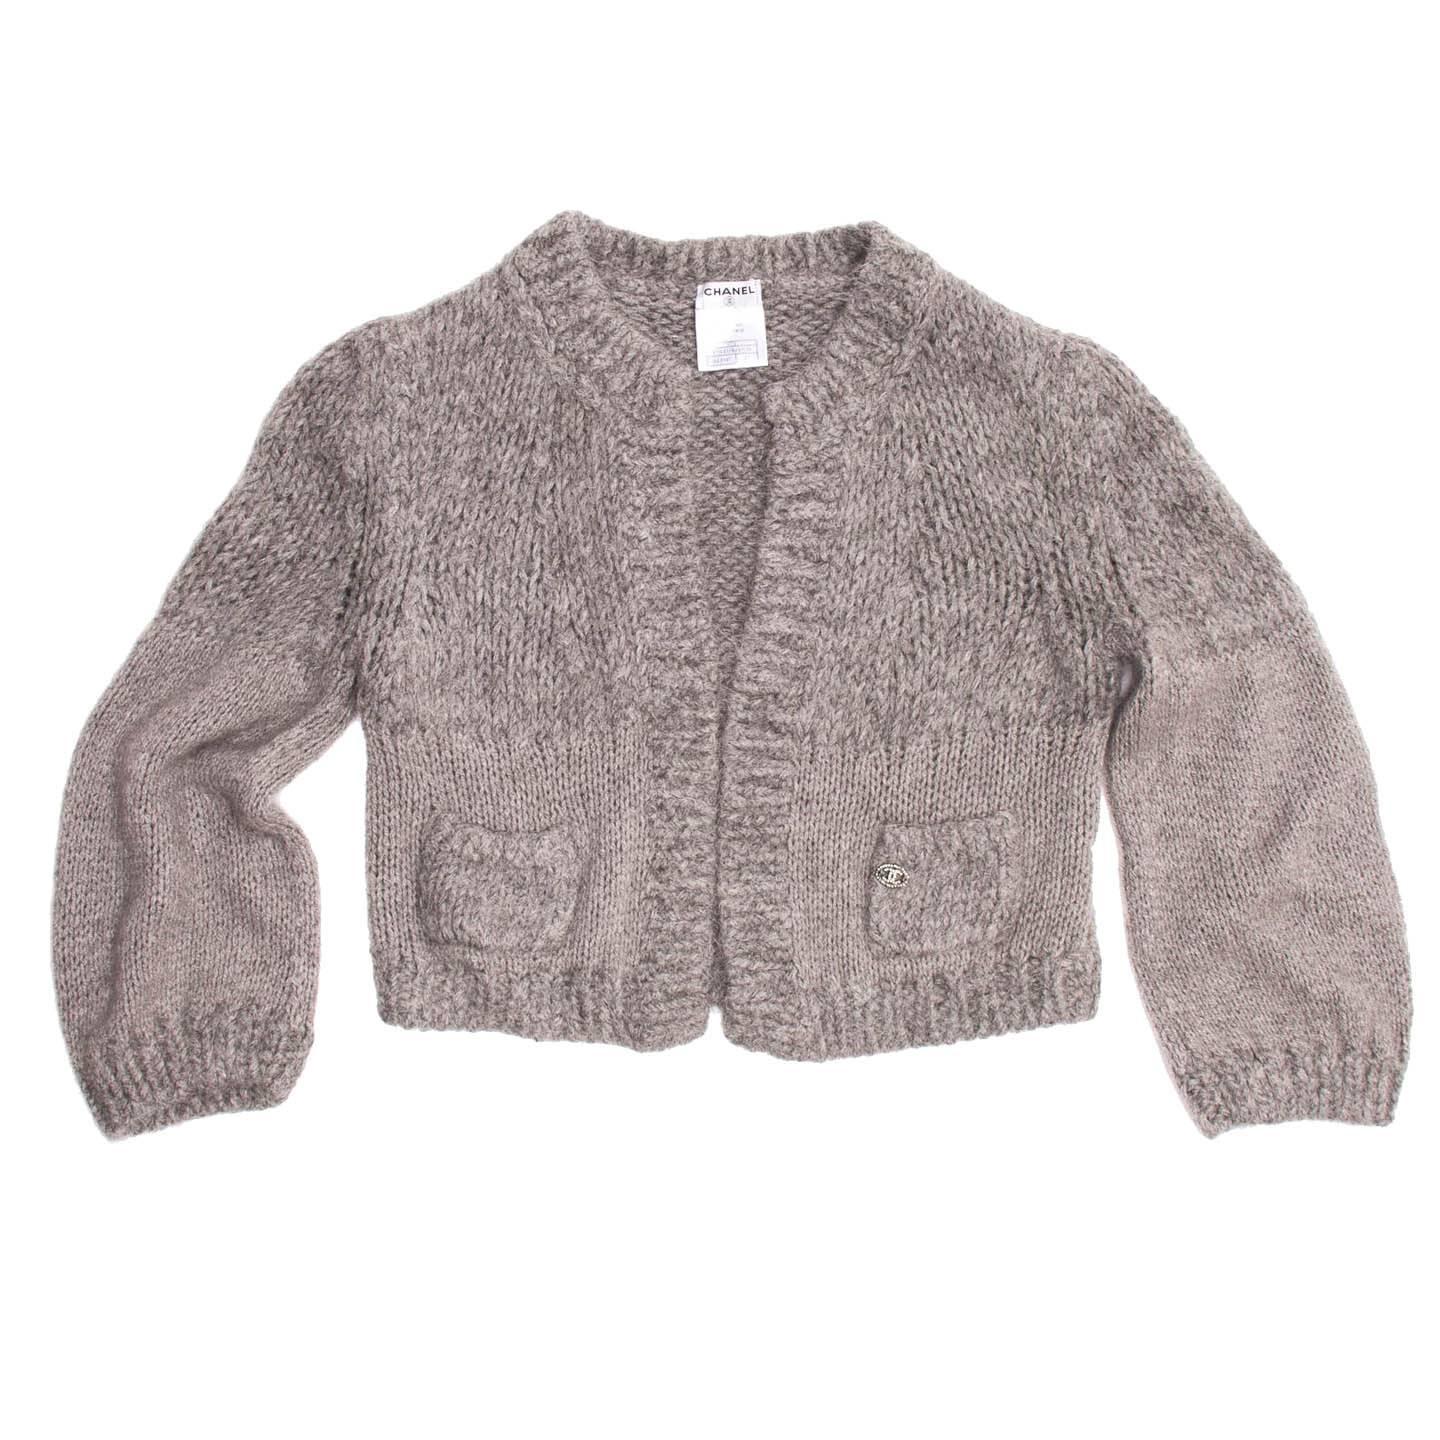 Melange grey angora/cashmere/chinchilla blend cropped cardigan with free open front. The collar has a classic Chanel round line and two mini patch pockets enriched by a beautiful jewel Chanel logo prettify the front of the cardigan.

Size  42 French